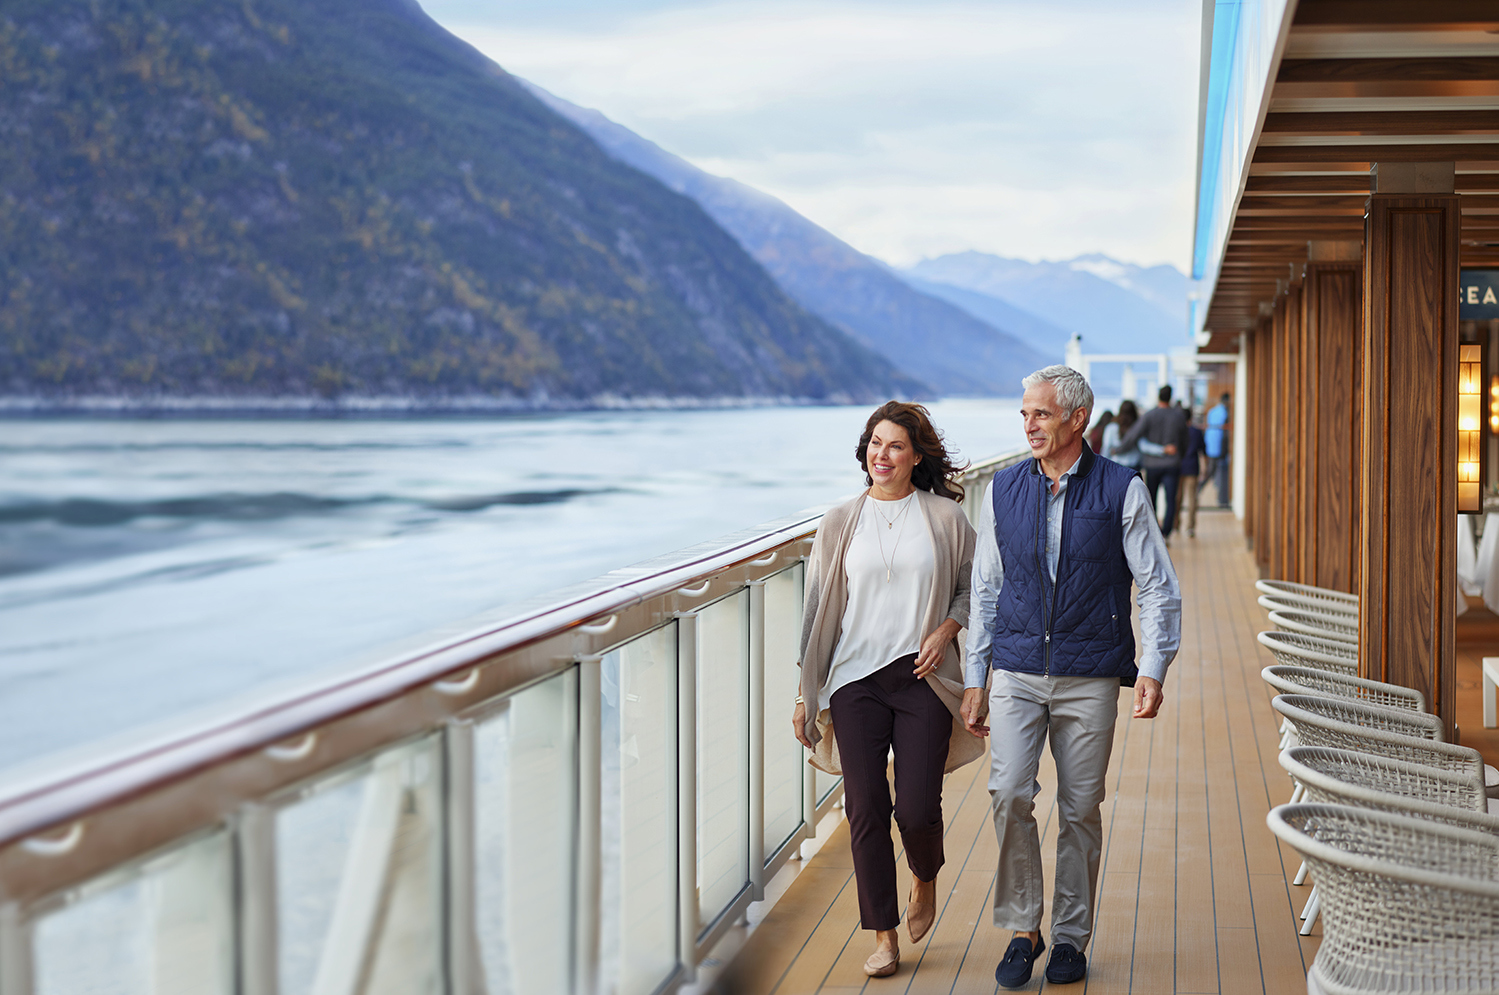 Norwegian Cruise Line will offer a selection of five-to-16-day voyages to Alaska during the summer of 2022, where guests can take in the mesmerizing views of the Last Frontier.